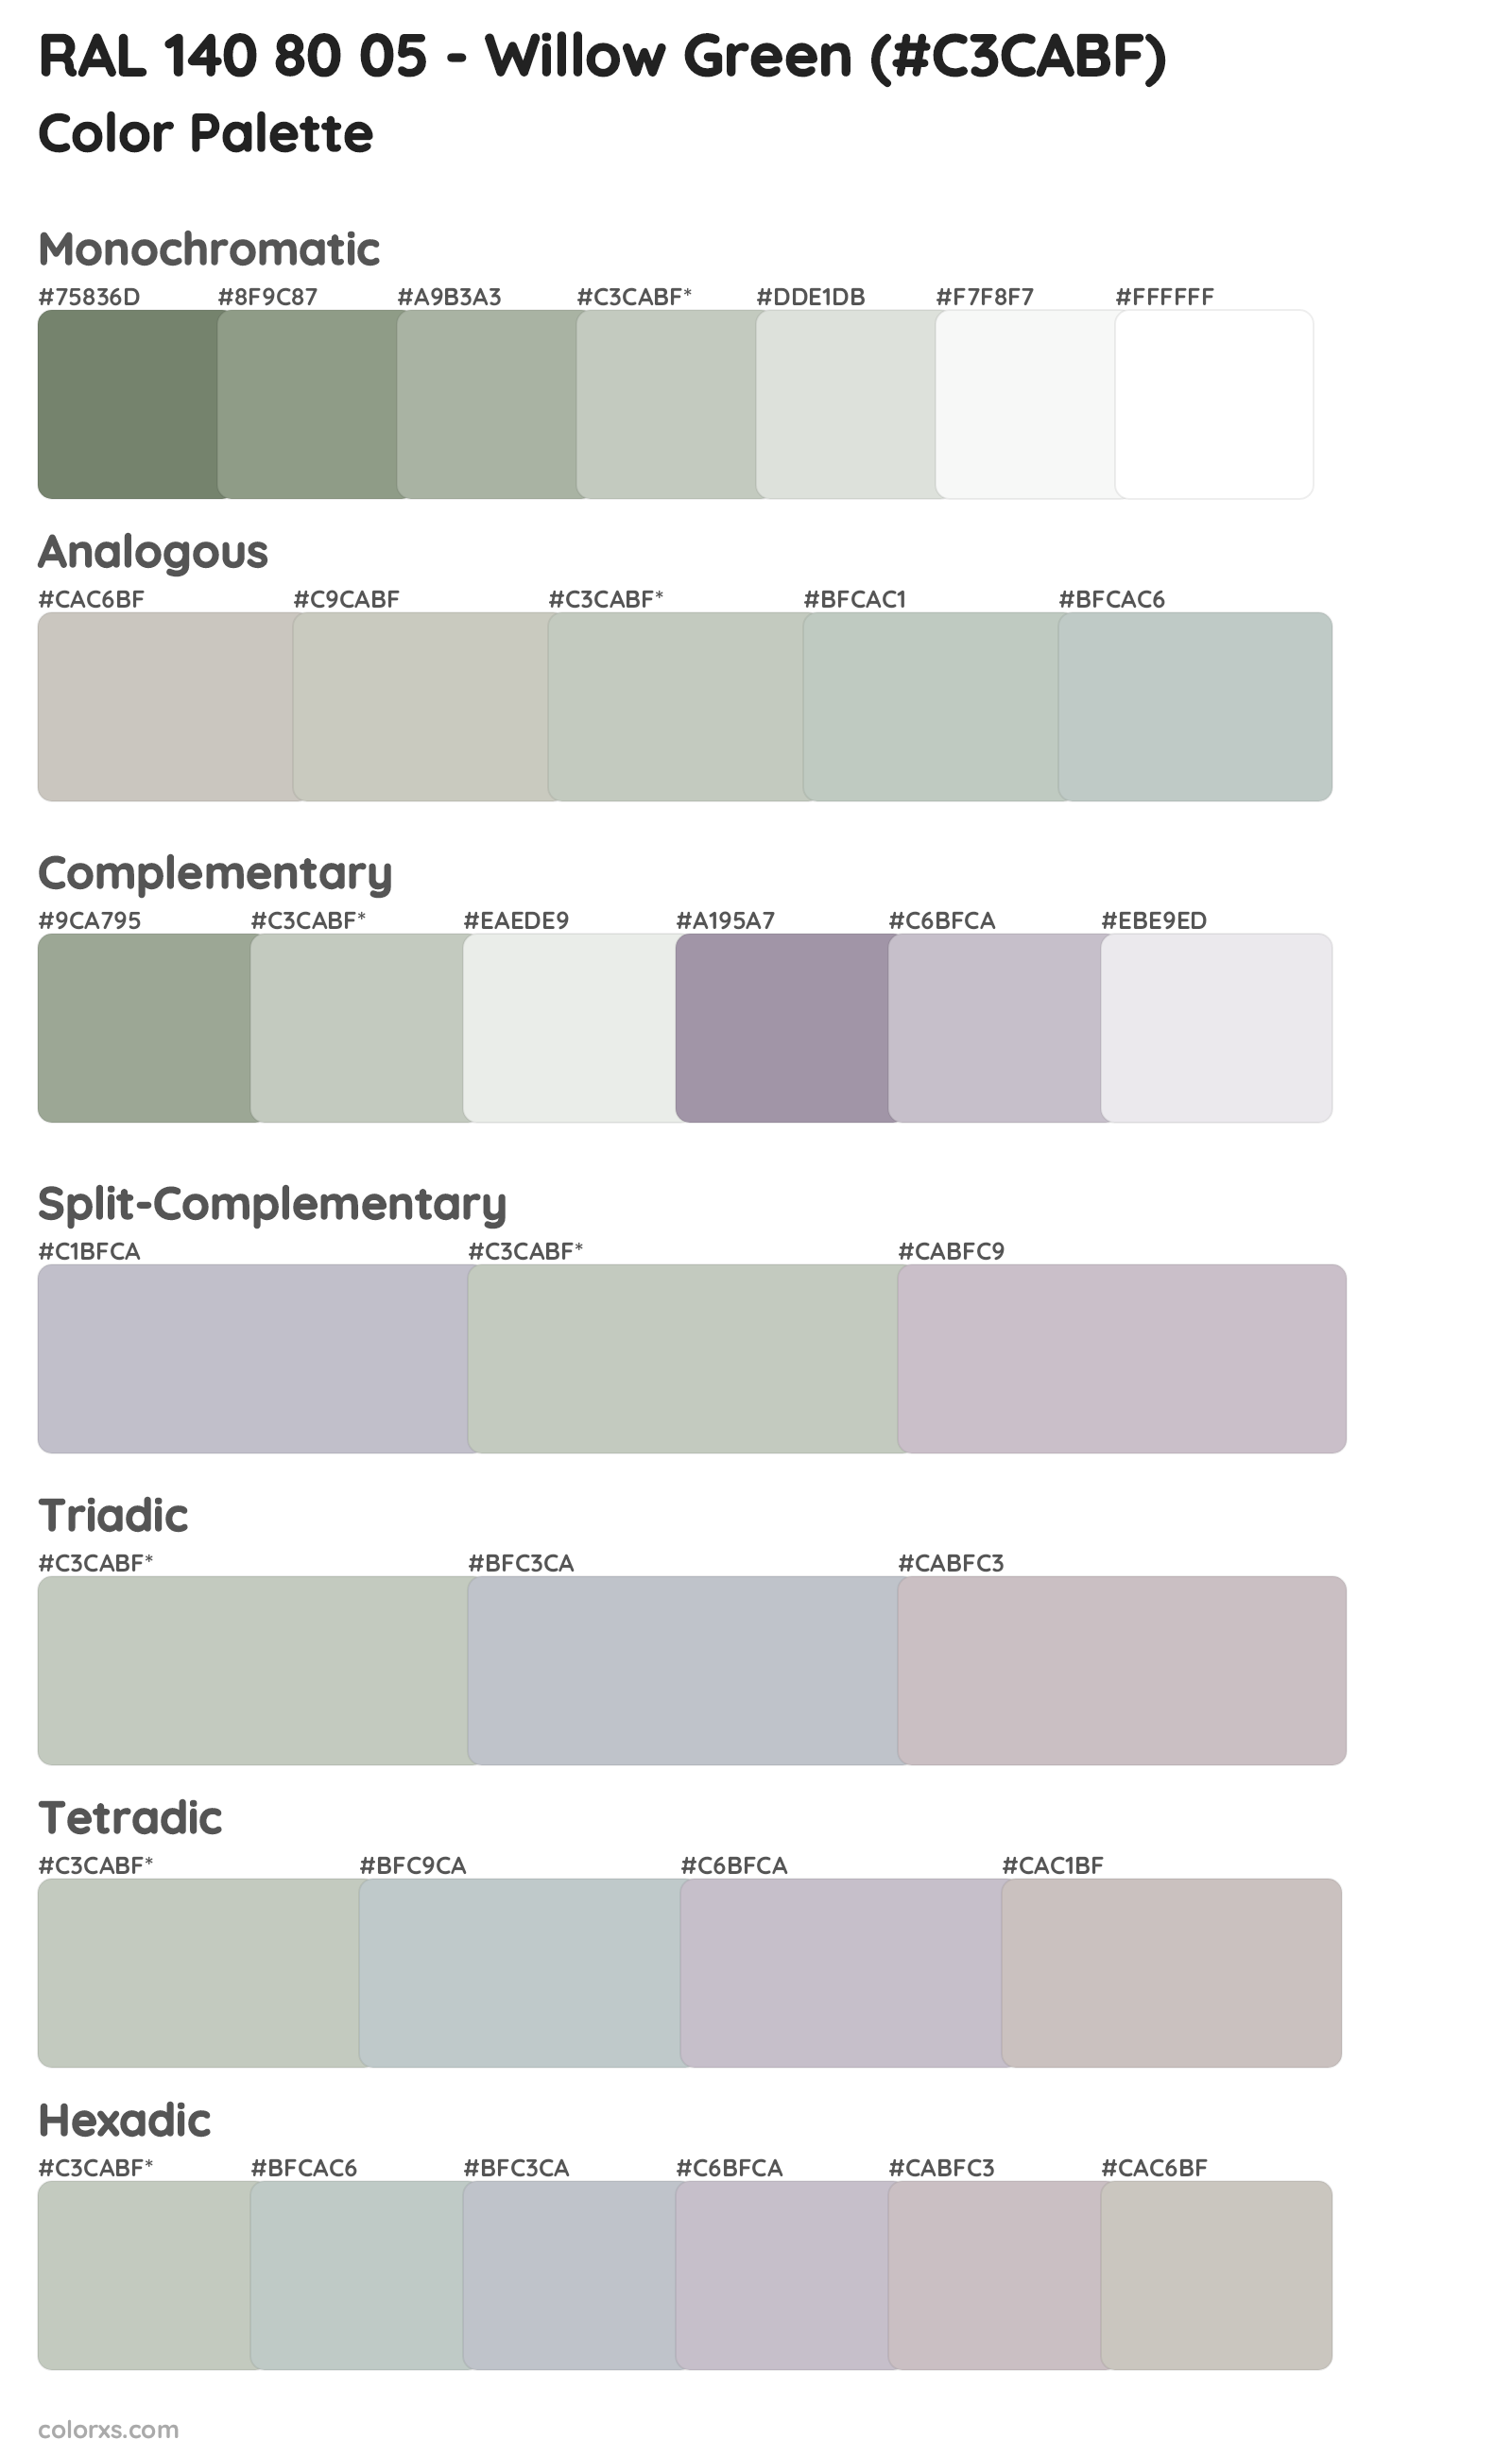 RAL 140 80 05 - Willow Green Color Scheme Palettes